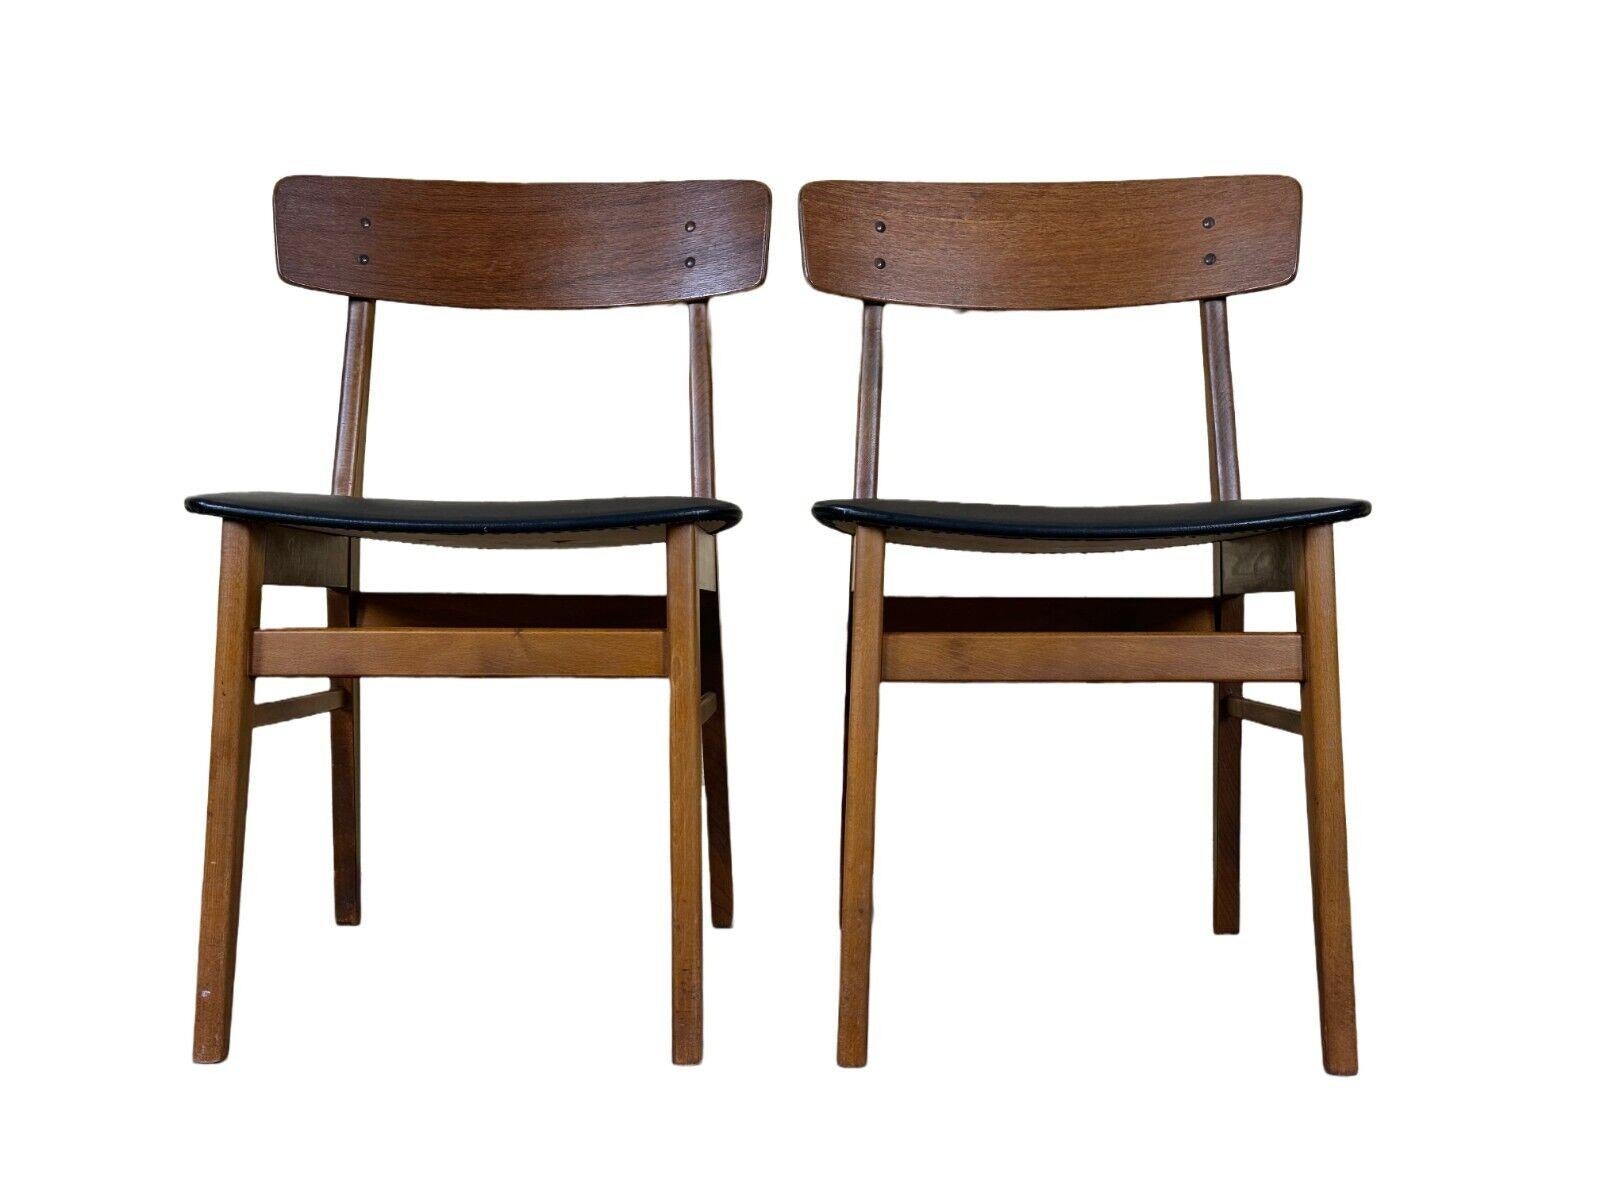 2x 60s 70s teak dining chair by Farstrup Møbler Made in Denmark

Object: 2x chair

Manufacturer: Farstrup

Condition: good

Age: around 1960-1970

Dimensions:

Width = 46cm
Depth = 46cm
Height = 78cm
Seat height = 45cm

Other notes:

The pictures